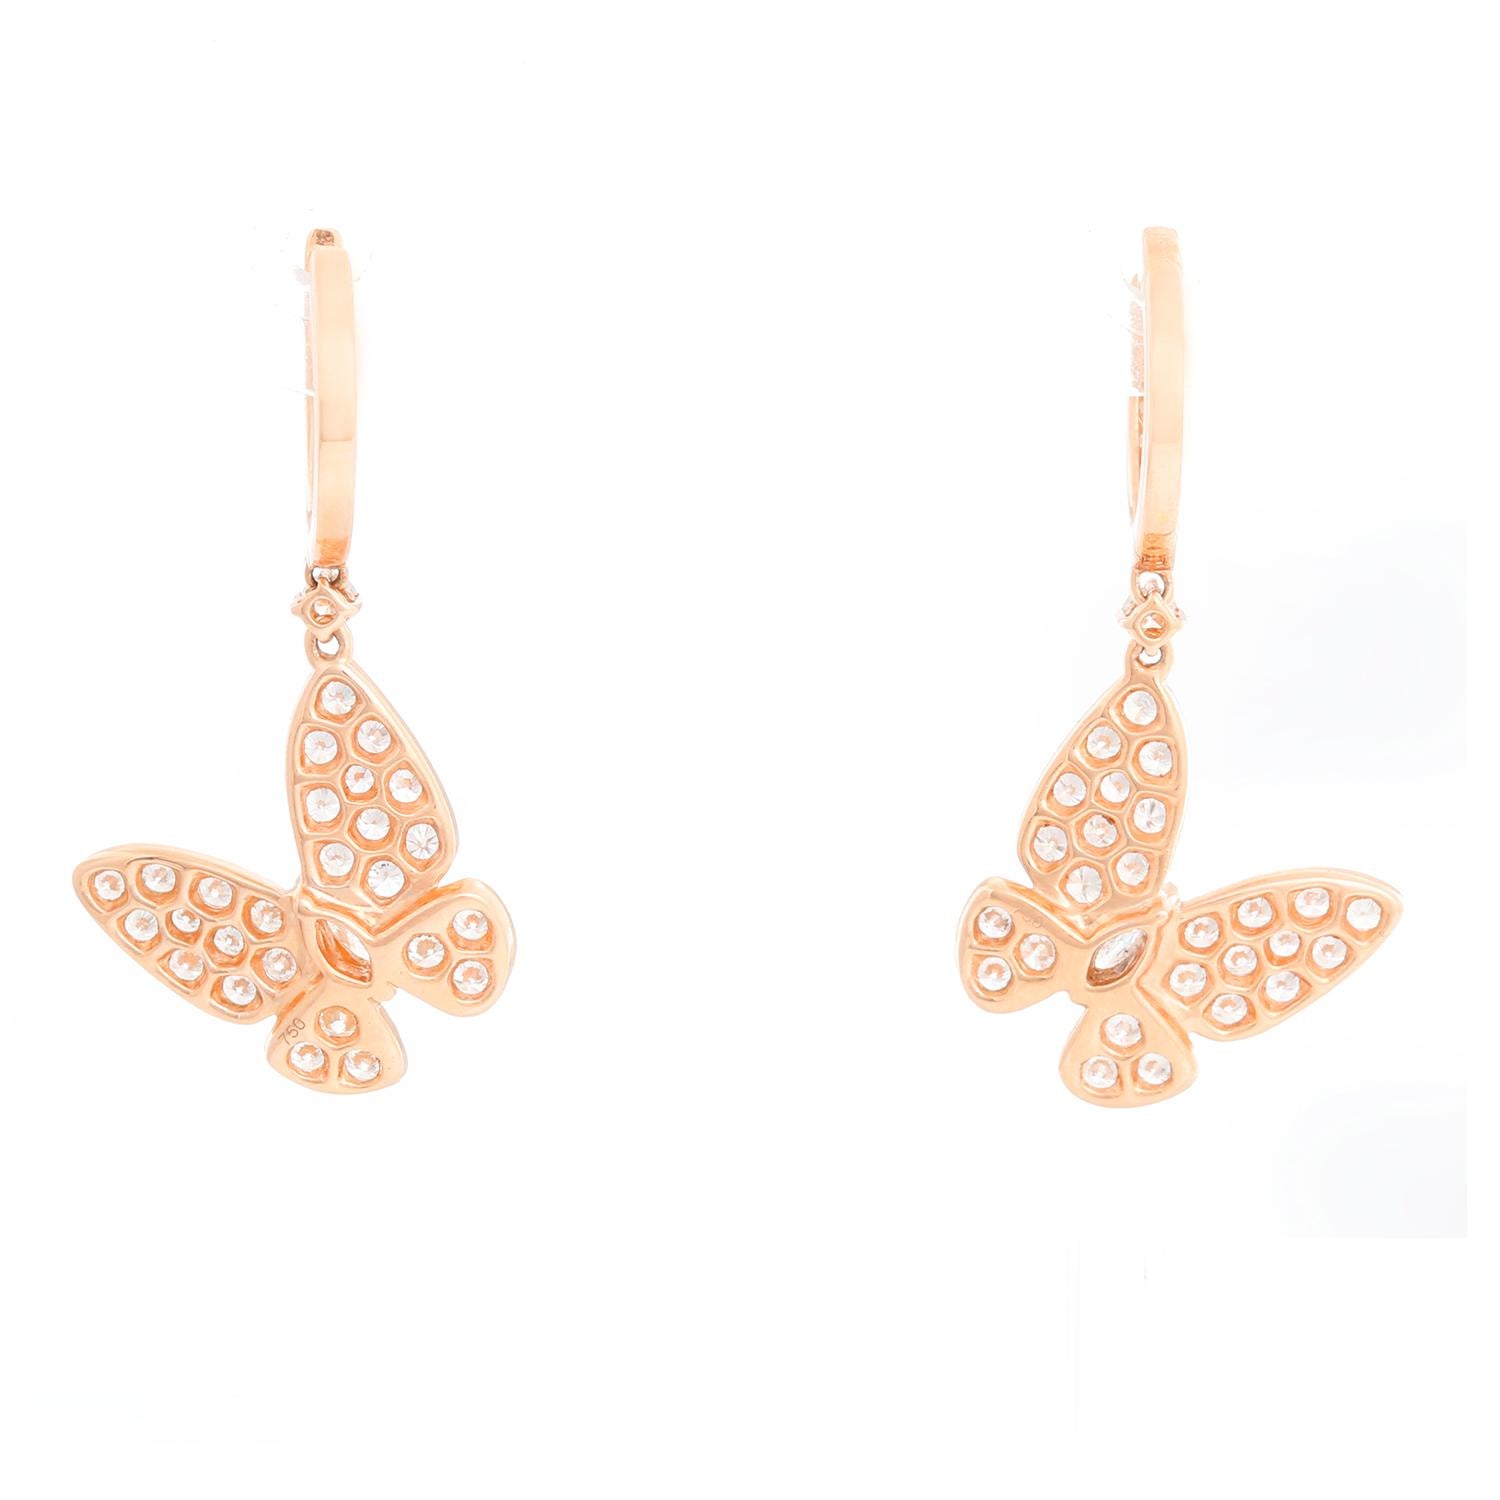 18K Rose Gold Butterfly Earrings - Unused rose gold dangle butterfly earrings. Weighing 1.40 carats of diamonds. Total weight 4.7 grams. Total length 1 inch and a half.